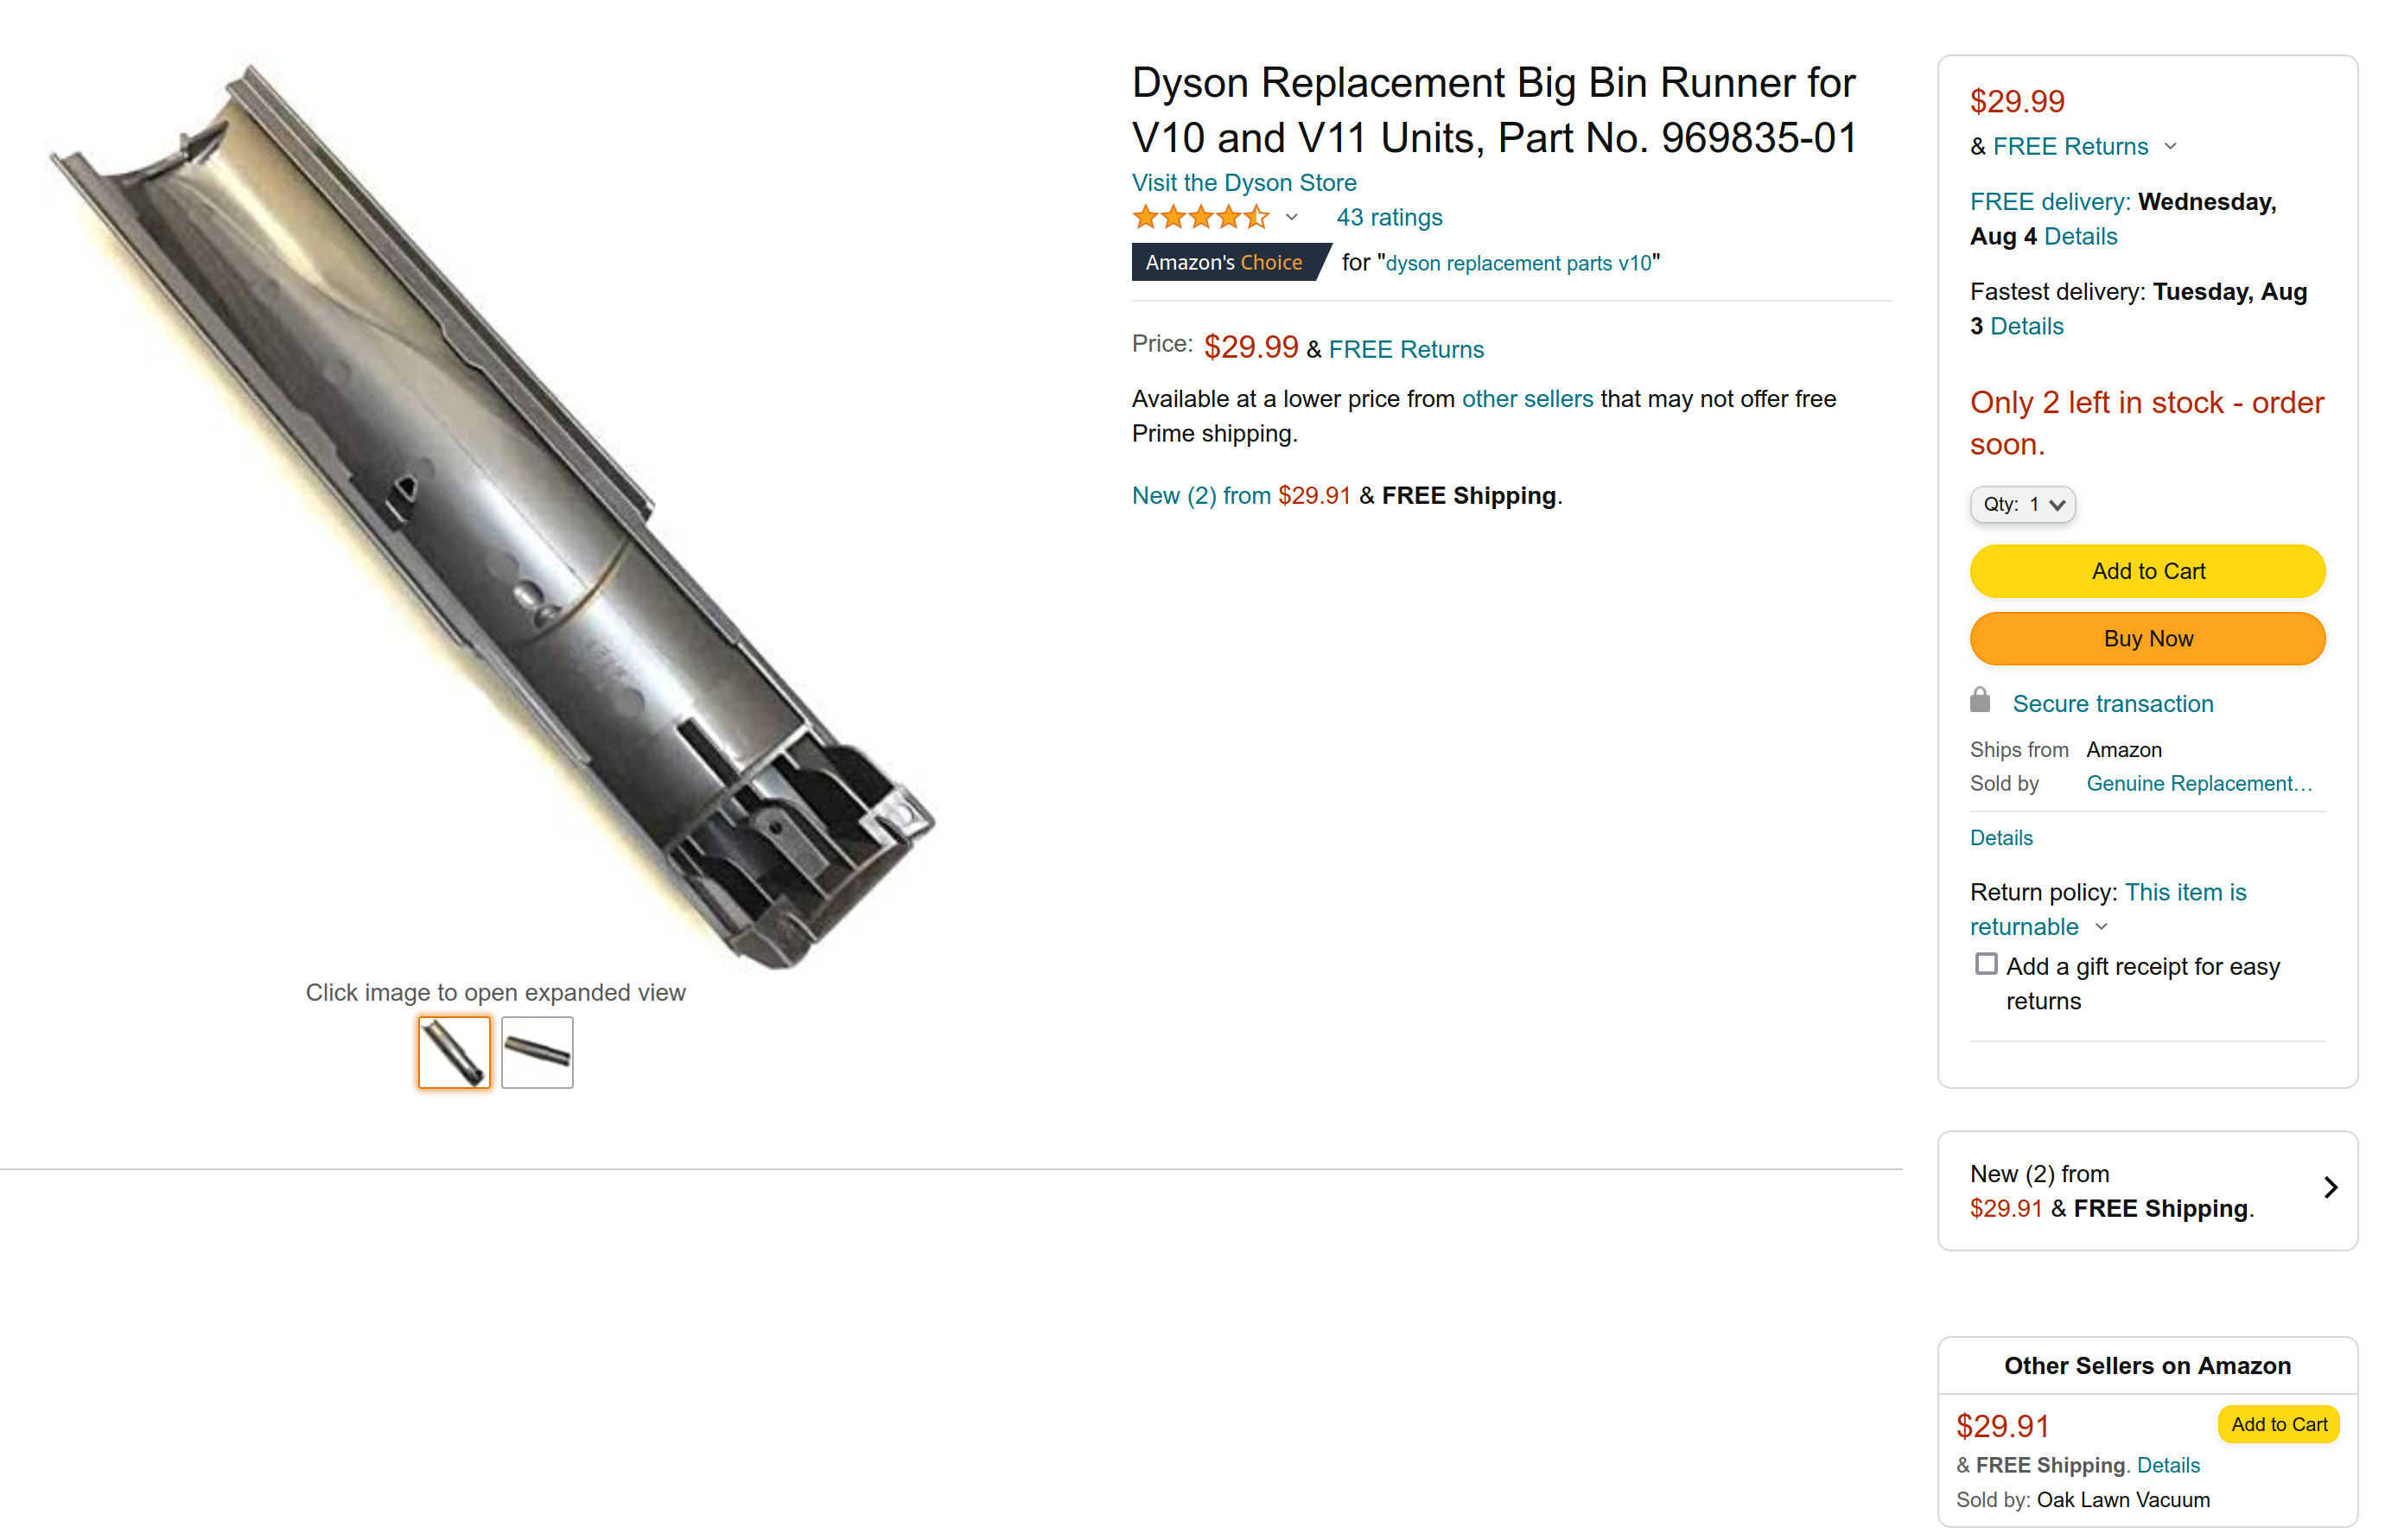 Dead Amazon page where Dyson Big Bin Runner 969835-01 at one time could be purchased.